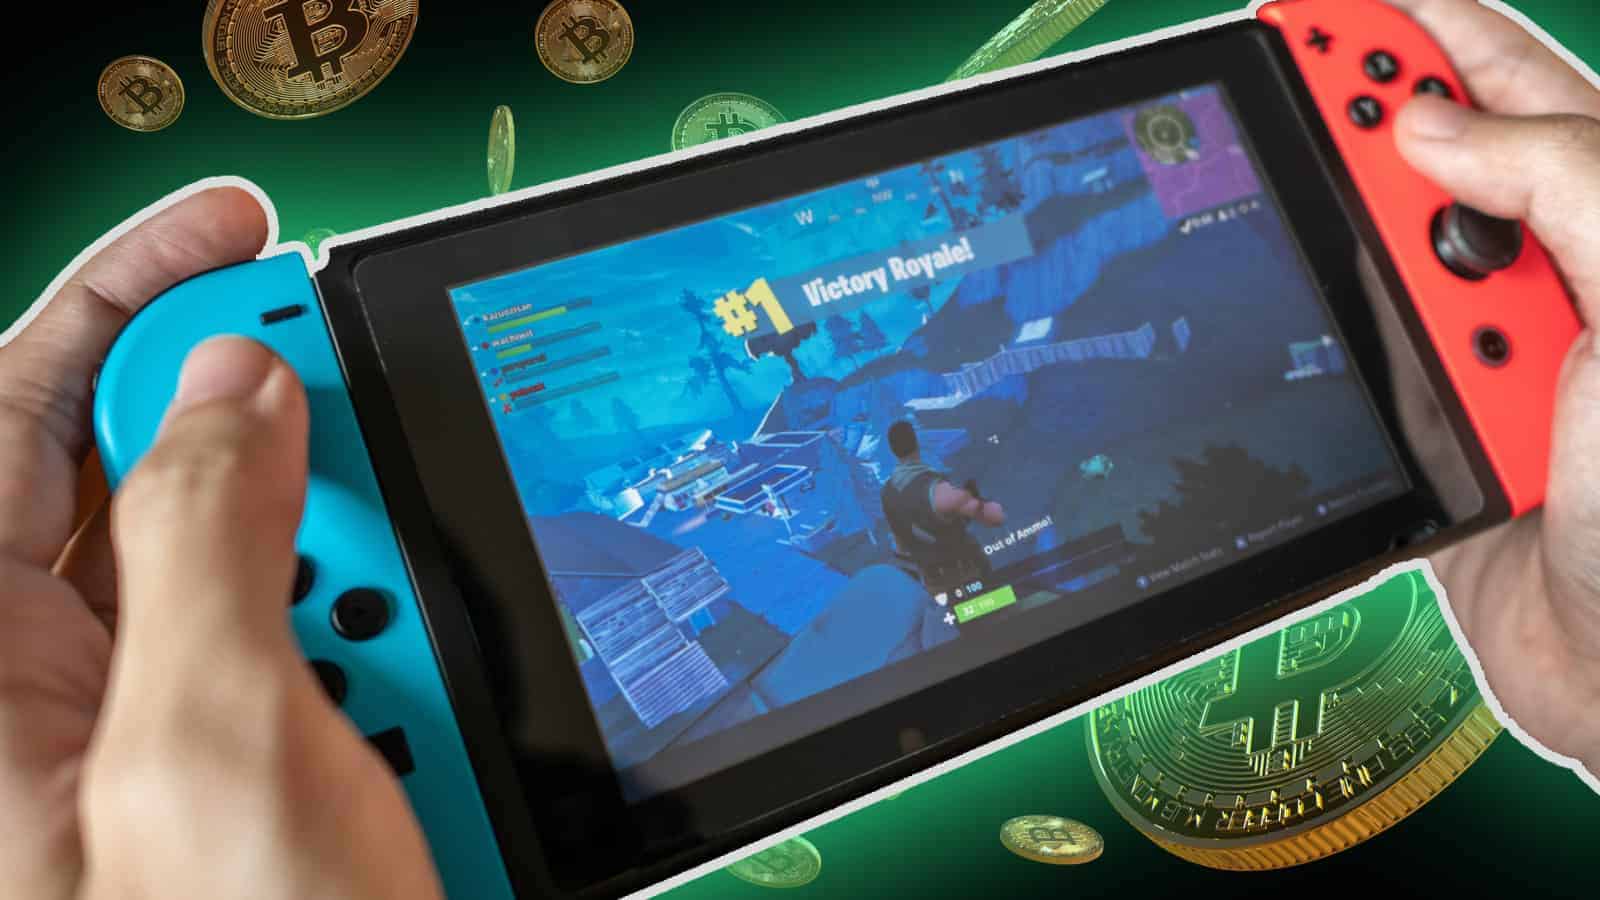 Fortnite Hackers Target Gamers Through Youtube To Steal Bitcoin